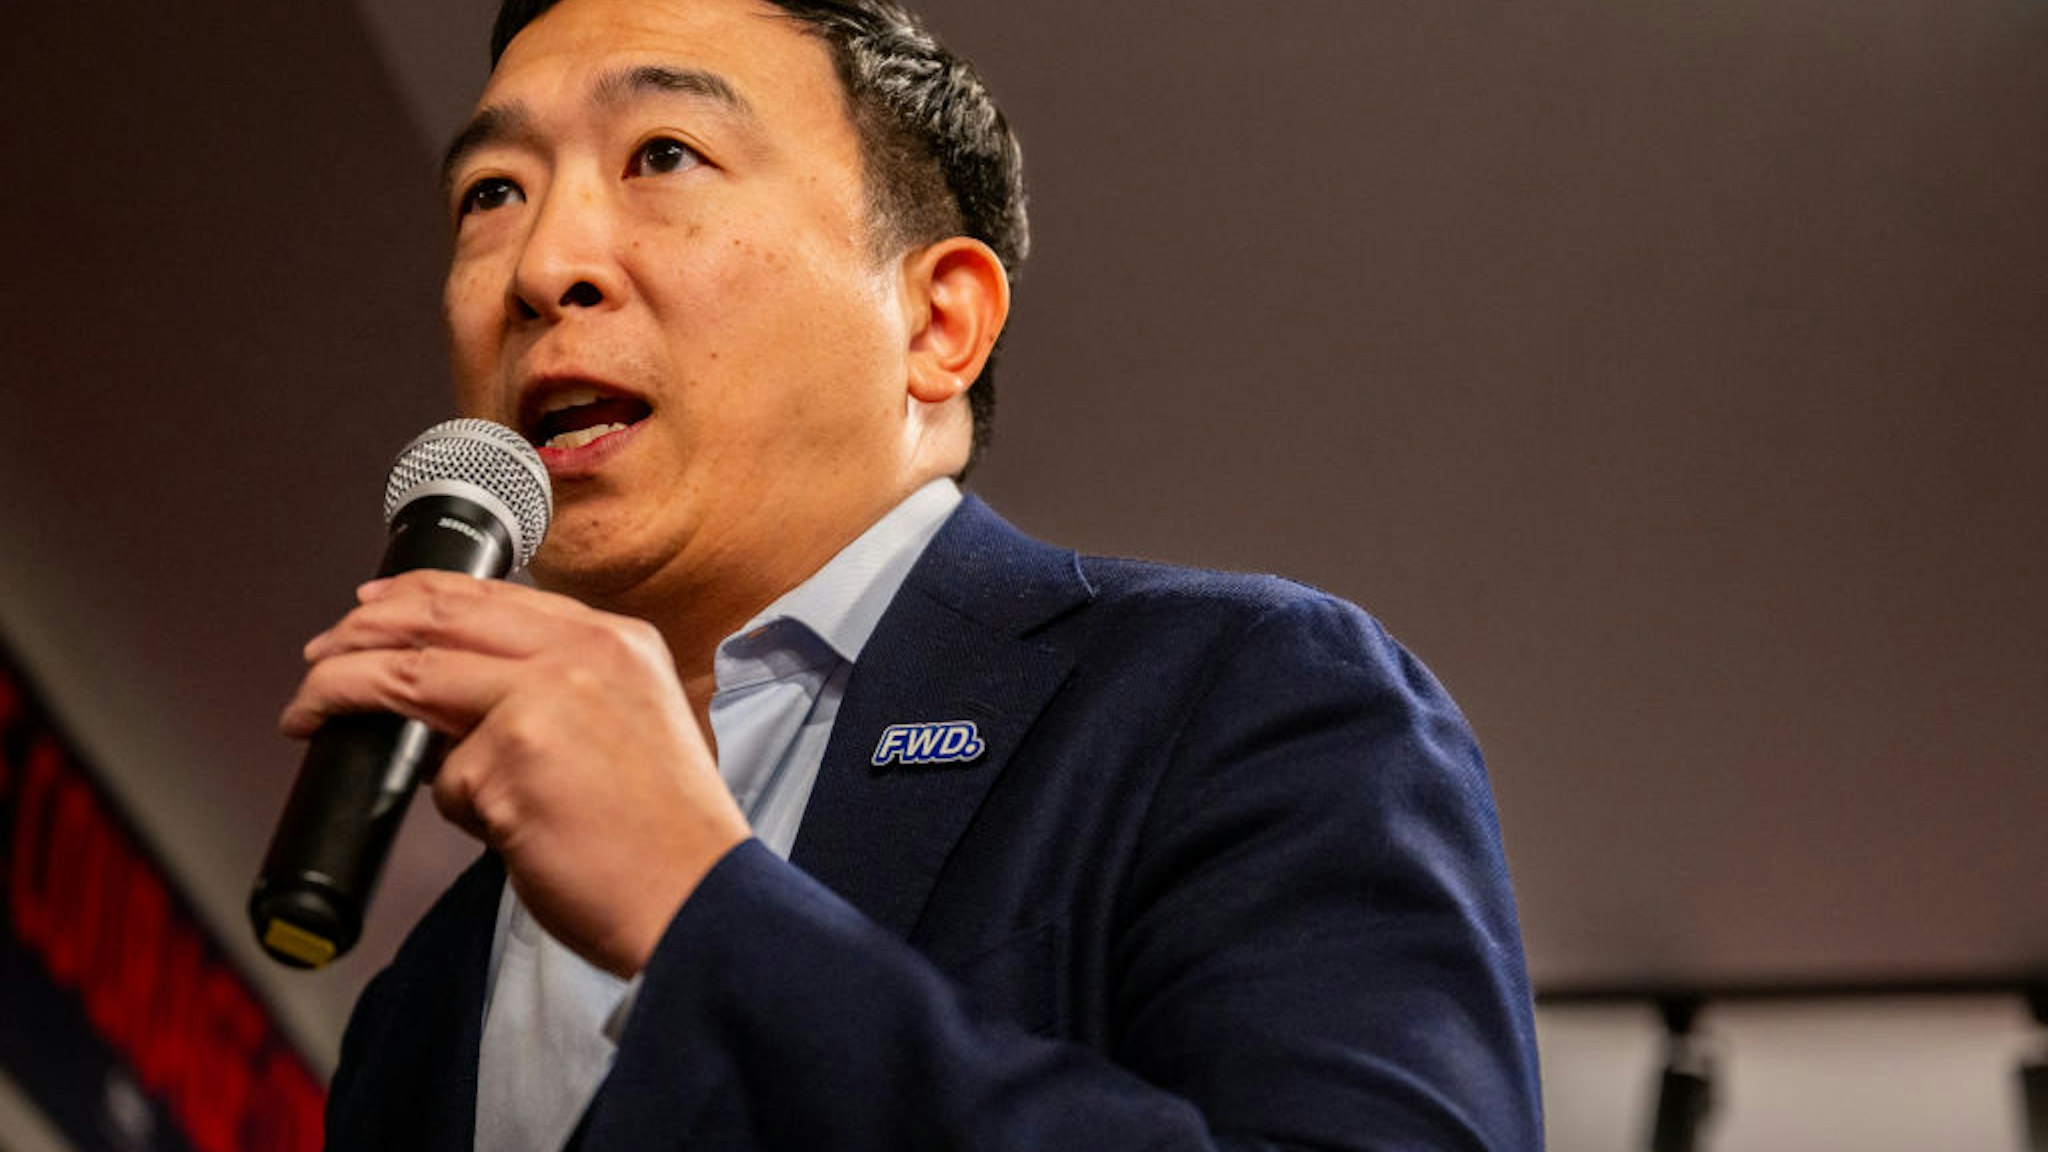 MANCHESTER, NEW HAMPSHIRE - JANUARY 22: Andrew Yang speaks to attendees ahead of Democratic challenger U.S. Rep. Dean Phillips' arrival at a campaign rally on January 22, 2024 in Manchester, New Hampshire. Phillips, a House Democrat for Minnesota, is challenging President Biden in the Democratic primary race. Residents prepare to head to the polls tomorrow for the New Hampshire Primary. (Photo by Brandon Bell/Getty Images)